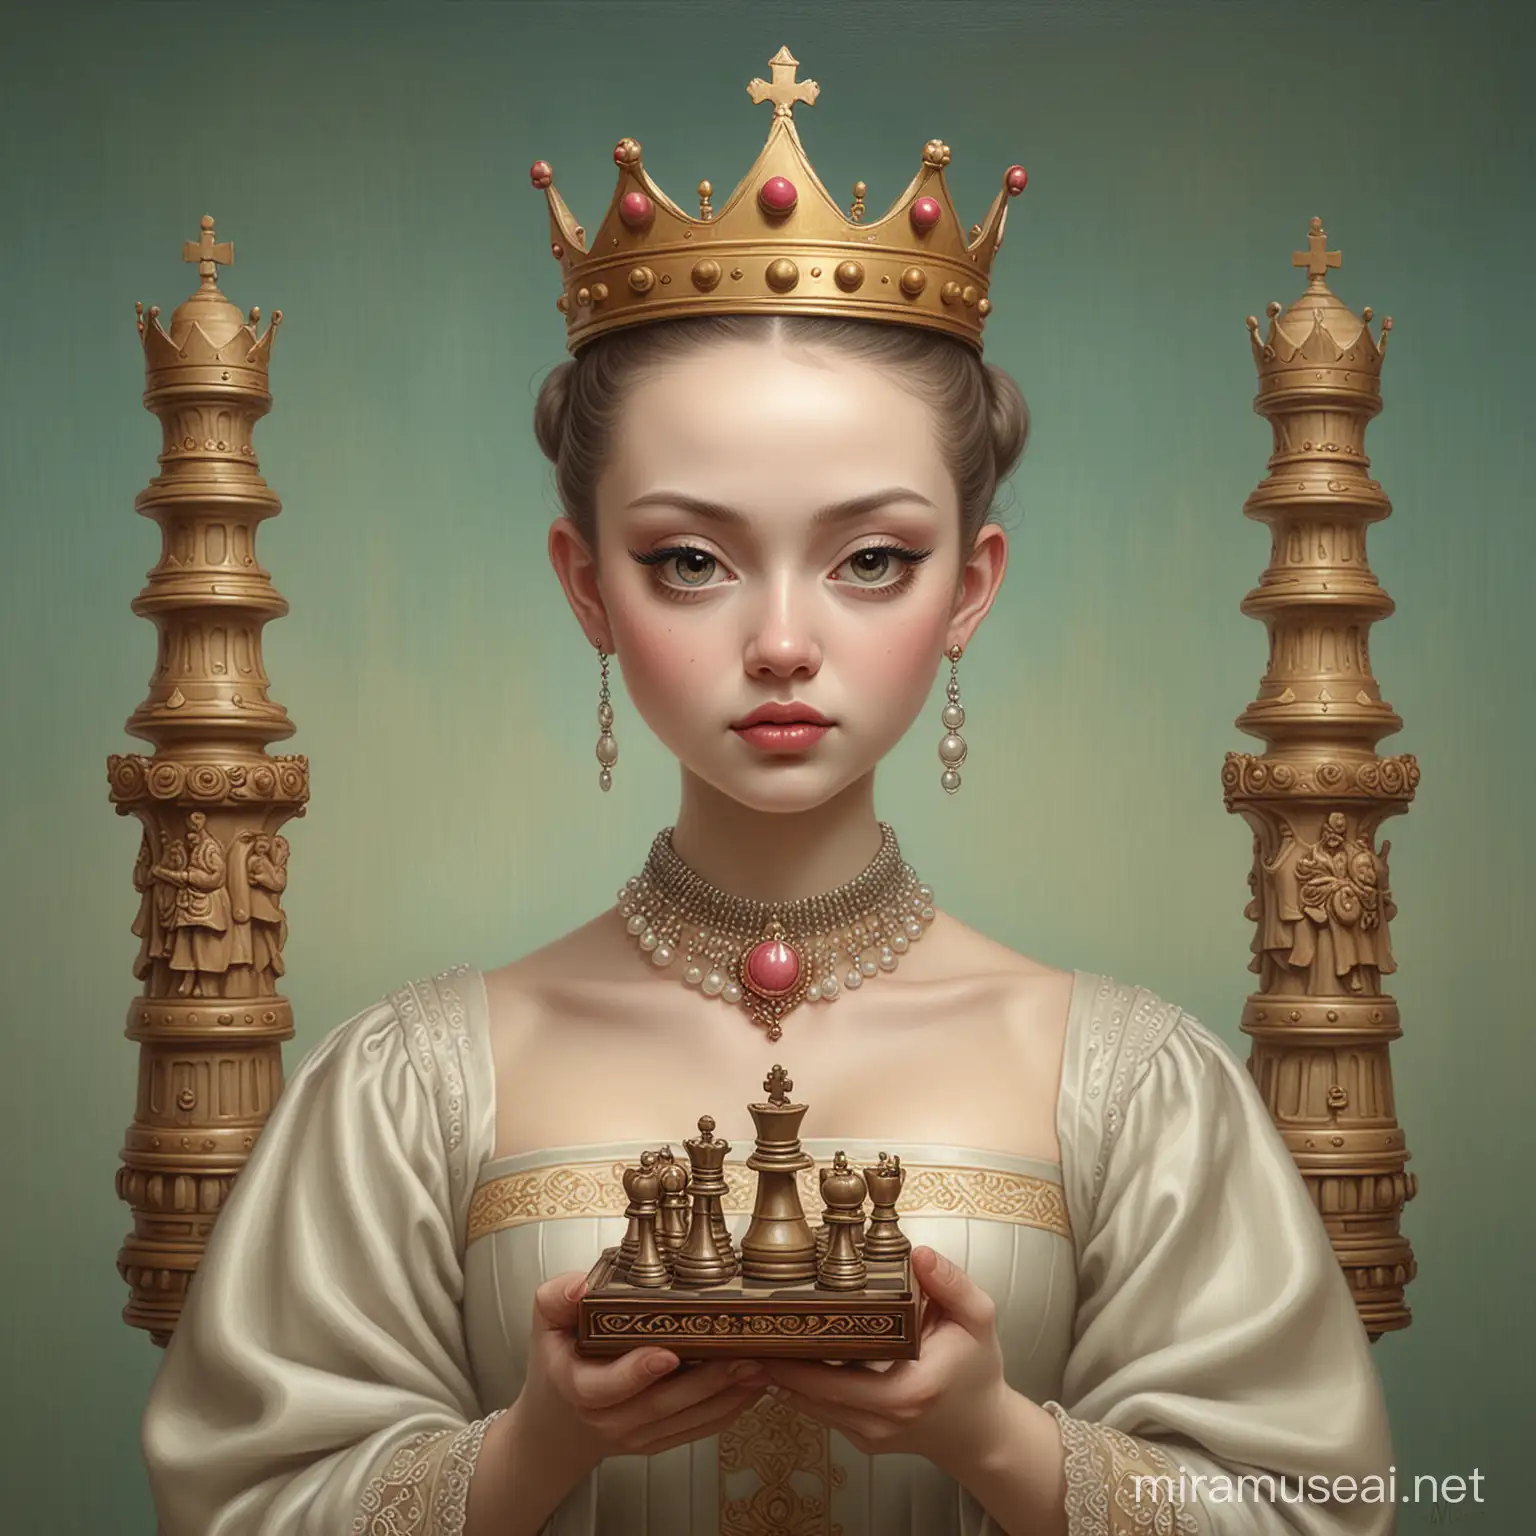 Enigmatic Woman with Chess Piece Crown Inspired by Mark Ryden